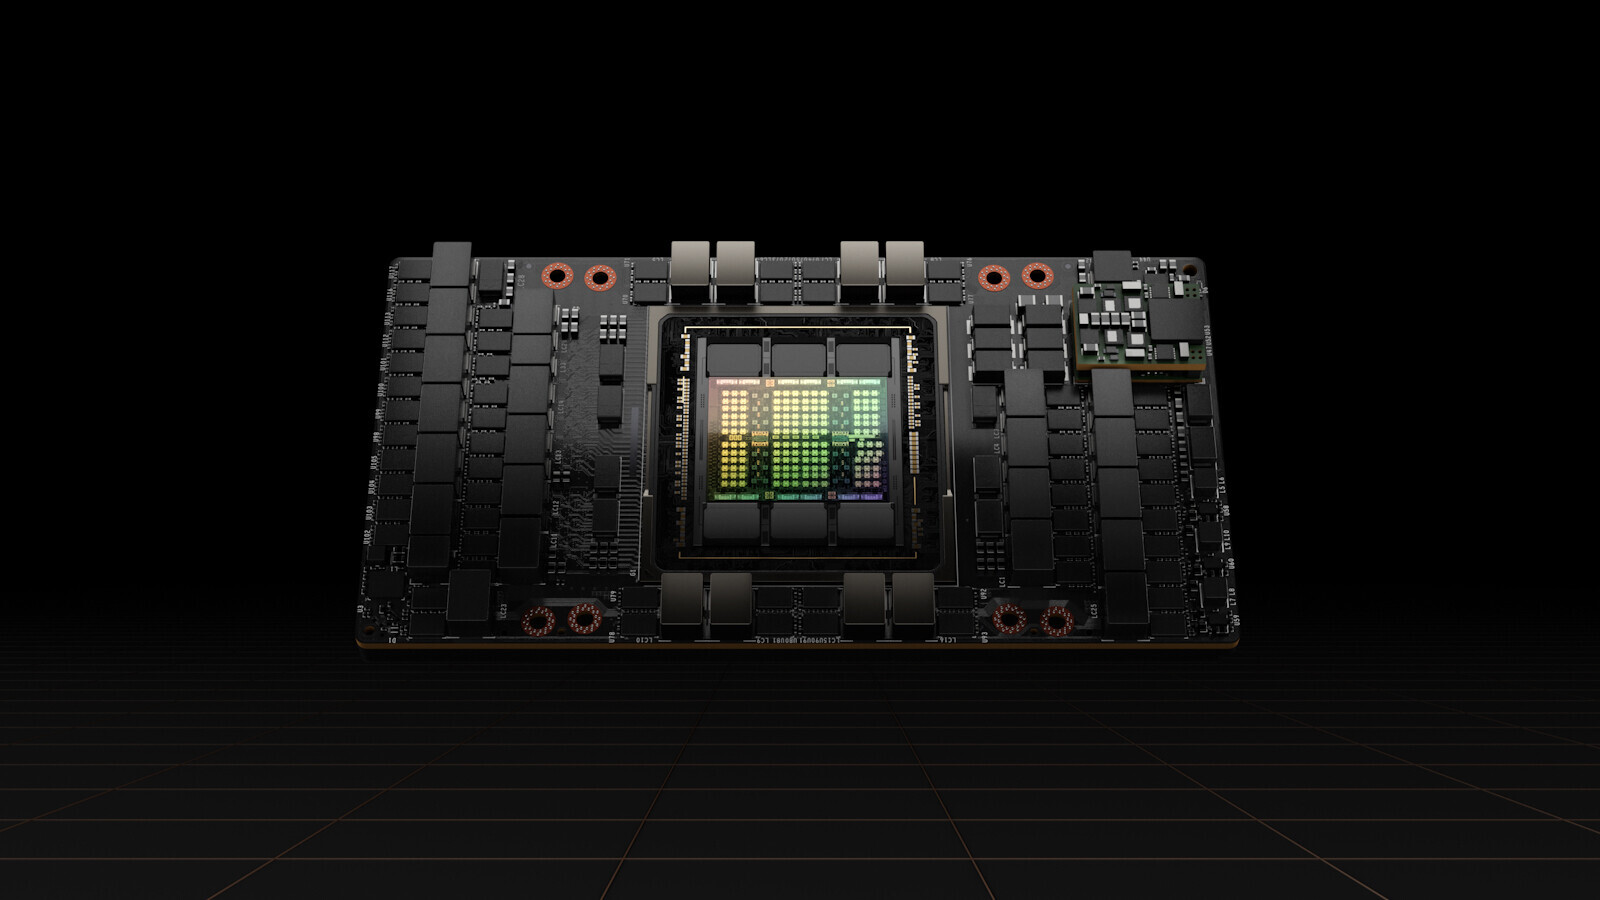 The pinnacle of Nvidia’s creation. Details about the huge GPU GH100 of the Hopper generation have appeared